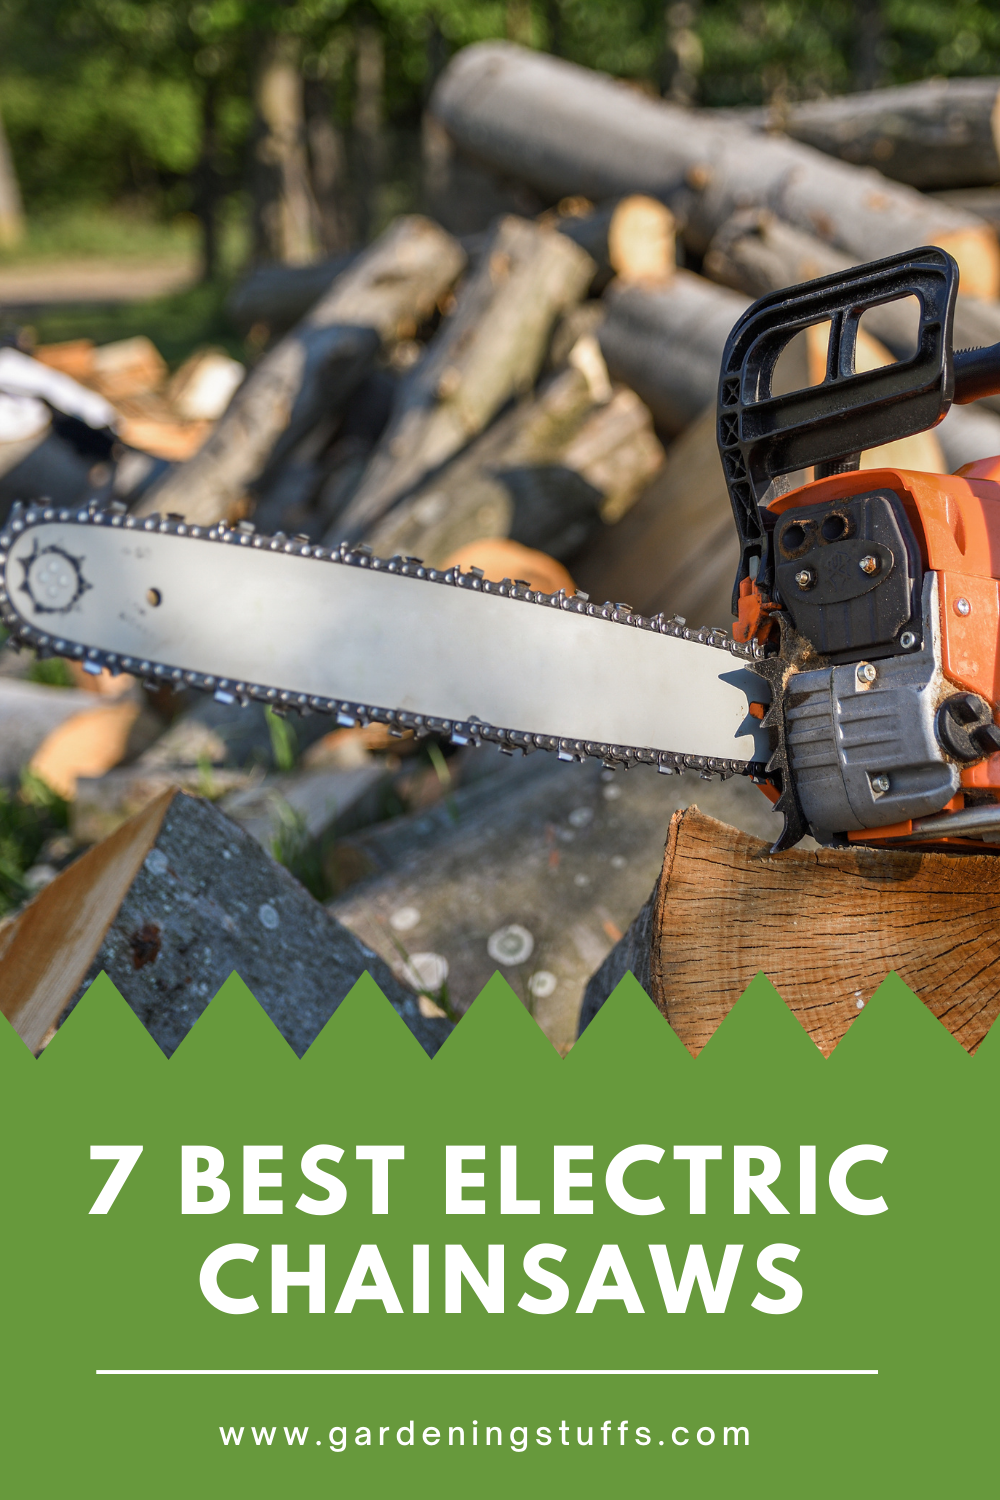 Read on and discover the best electric chainsaws, along with some tips on what to look out for. So, whether you’re a professional or simply need something for personal use, you’re sure to find one to suit you.